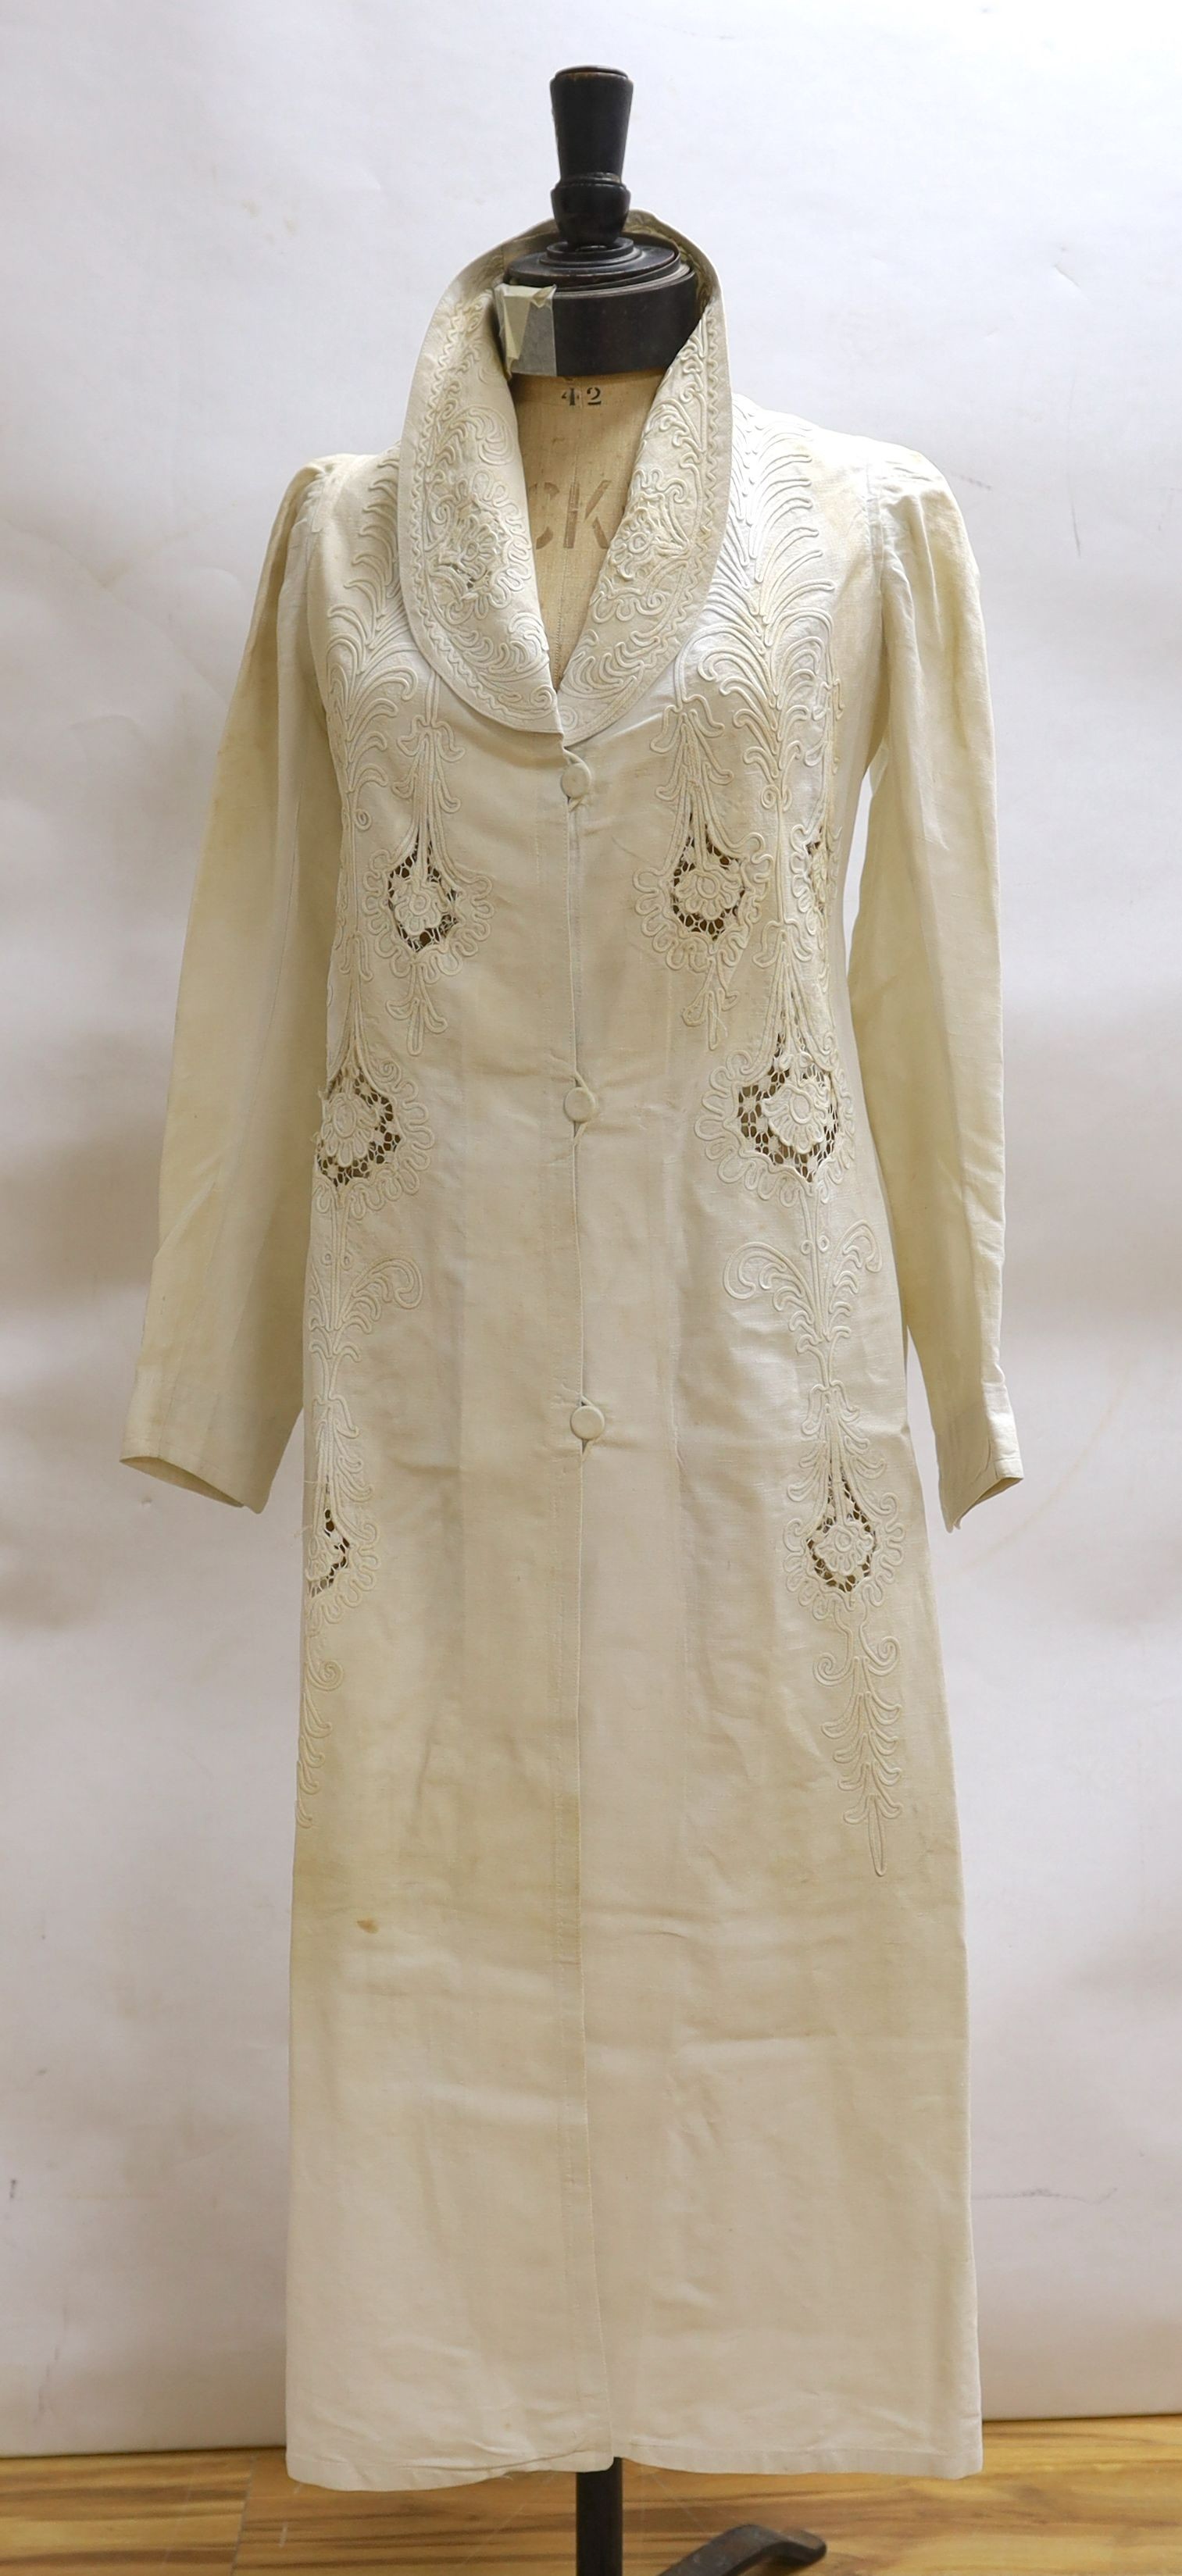 An Edwardian white/cream linen lady's coat with cut work detail and unusual button detail to the back